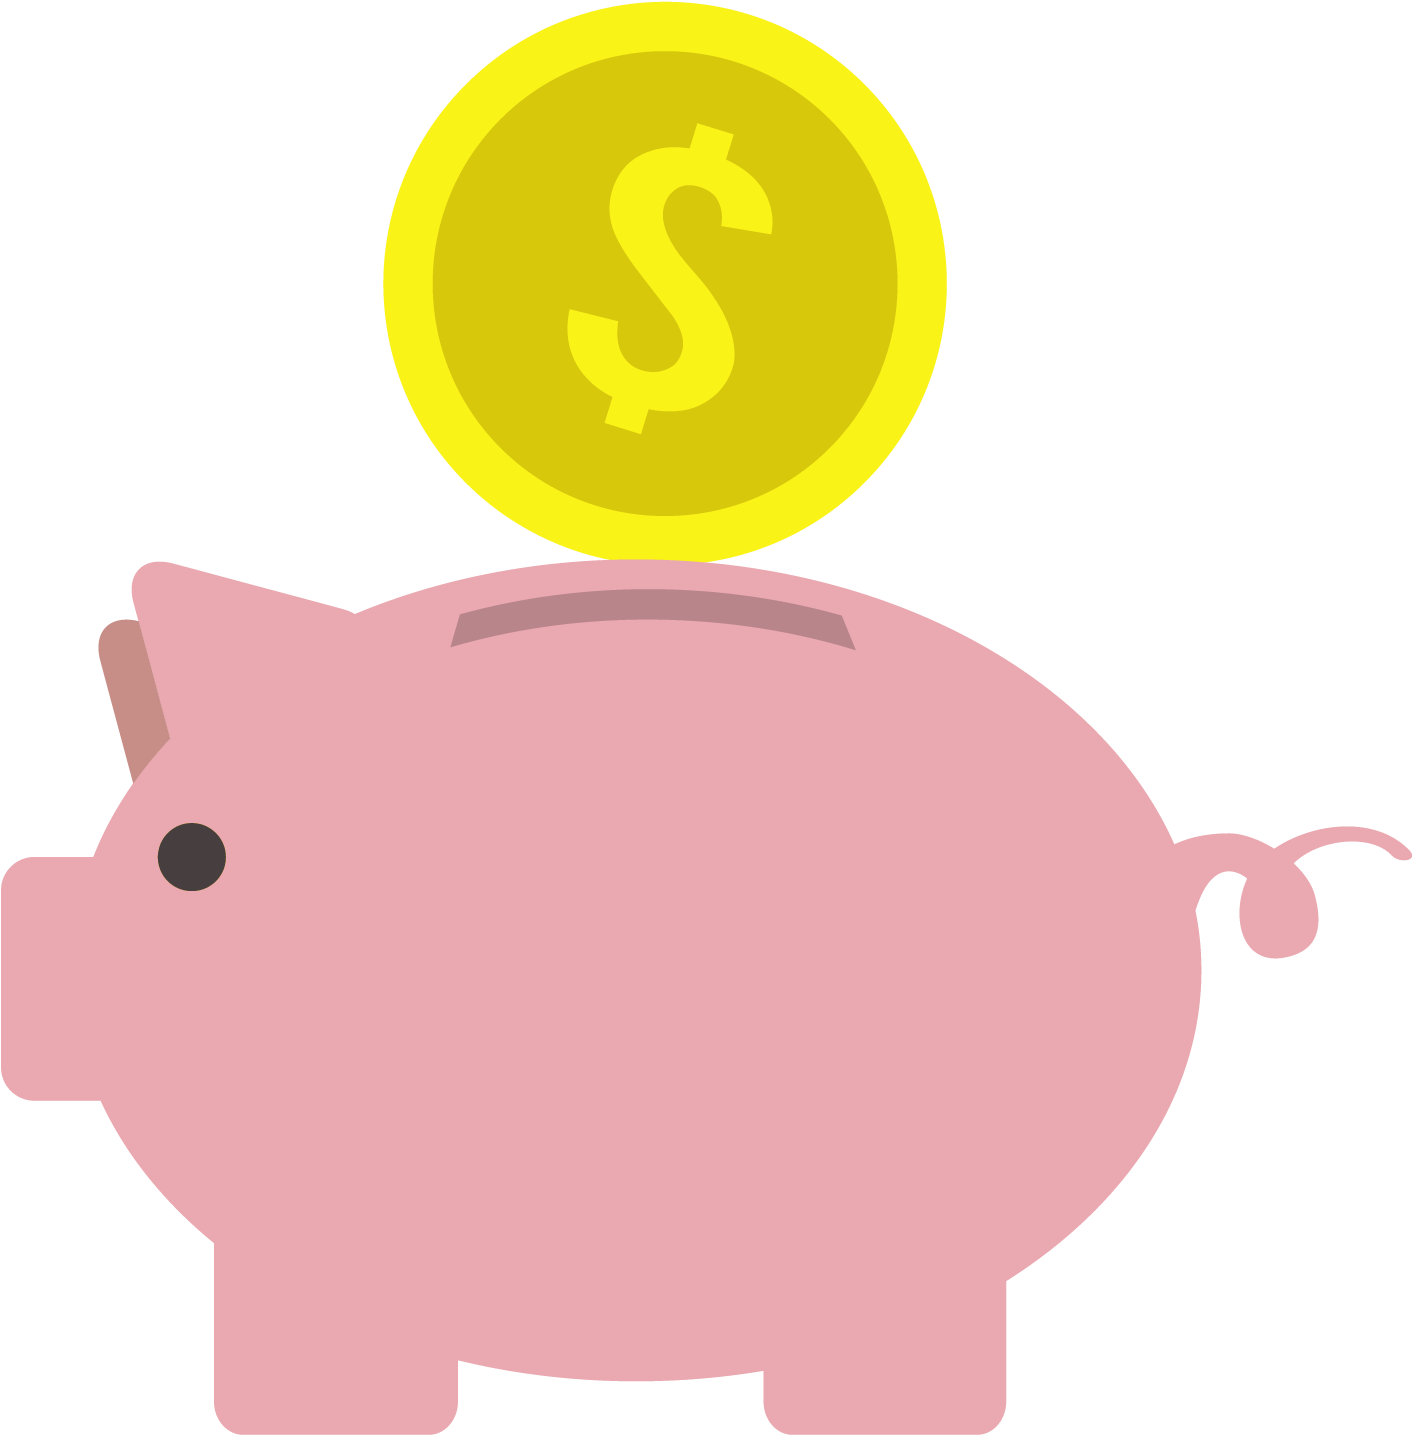 Coins Piggy Bank PNG Free Image